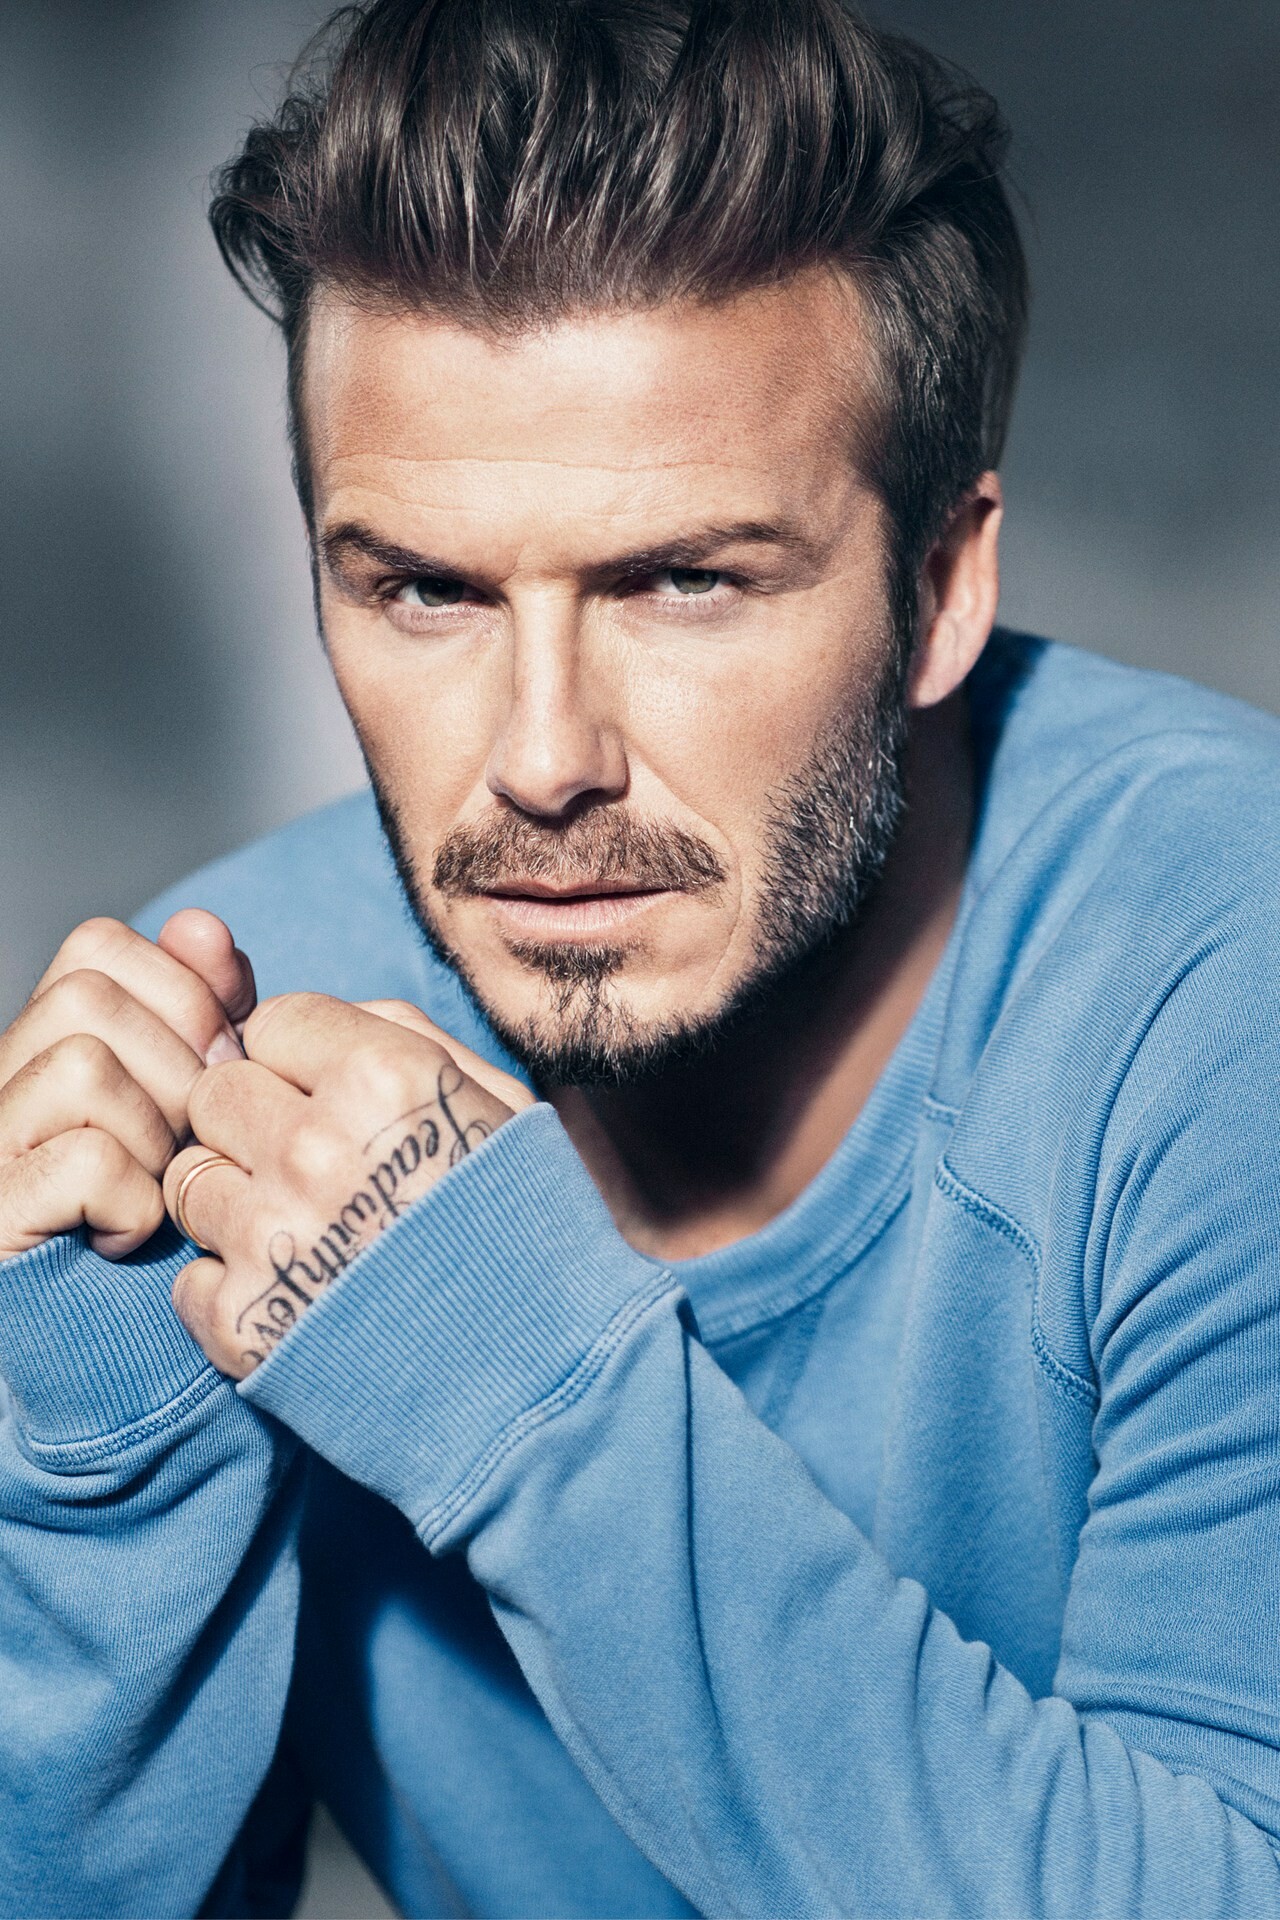 David Beckham: Sports, Was appointed an OBE for services to football on 13 June 2003. 1280x1920 HD Wallpaper.